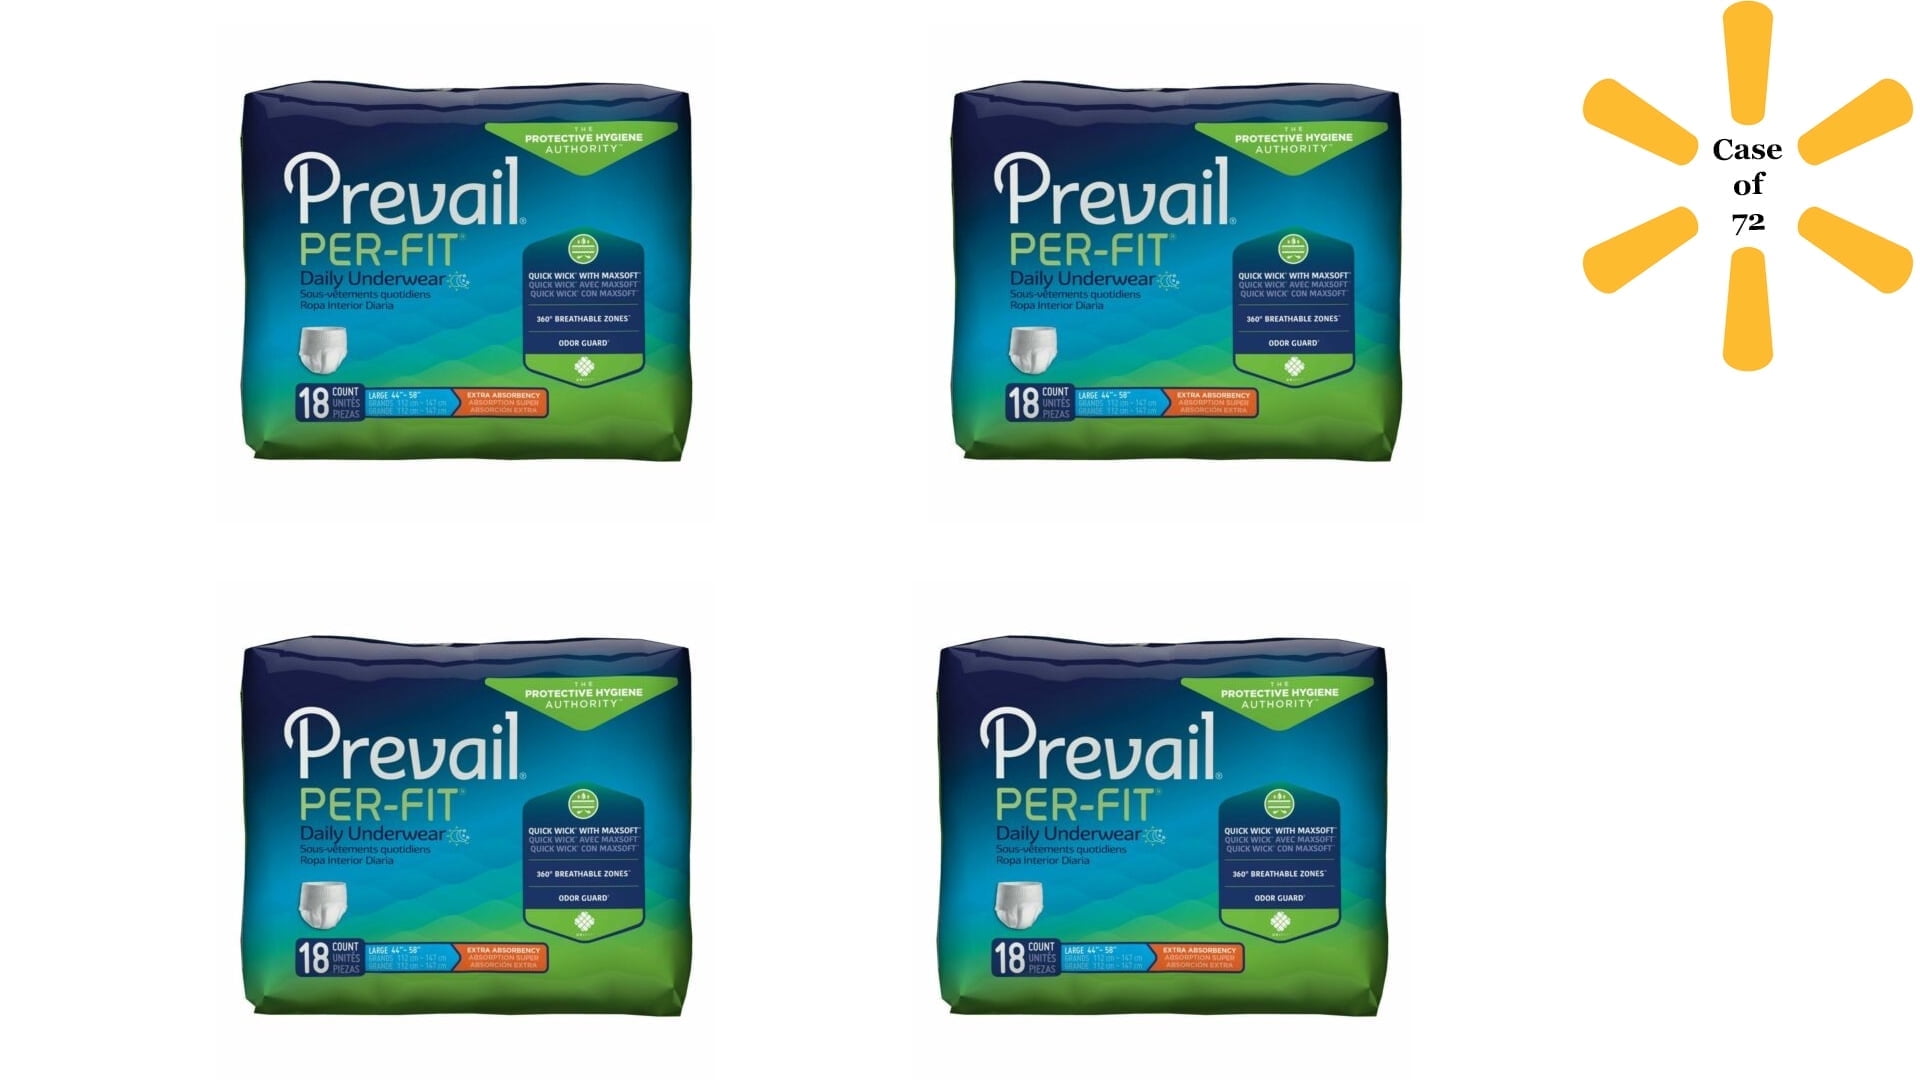 Prevail for Women Daily Absorbent Underwear - Large, Heavy Absorbency, 72 ct